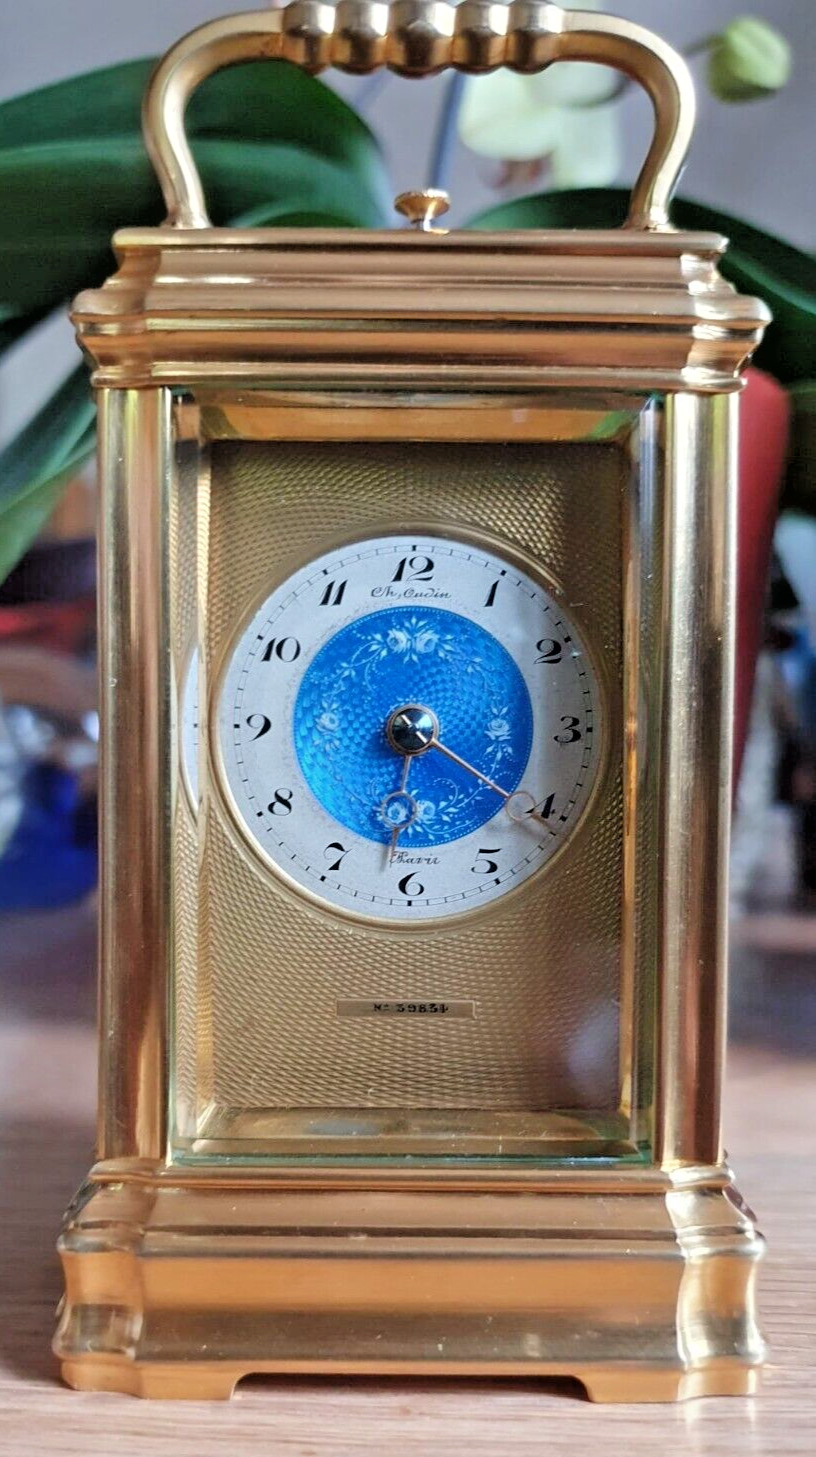 RARE SMALL SIZE FRANCE CARRIAGE CLOCK REPEATER CHARLES OUDIN GORGE CASE